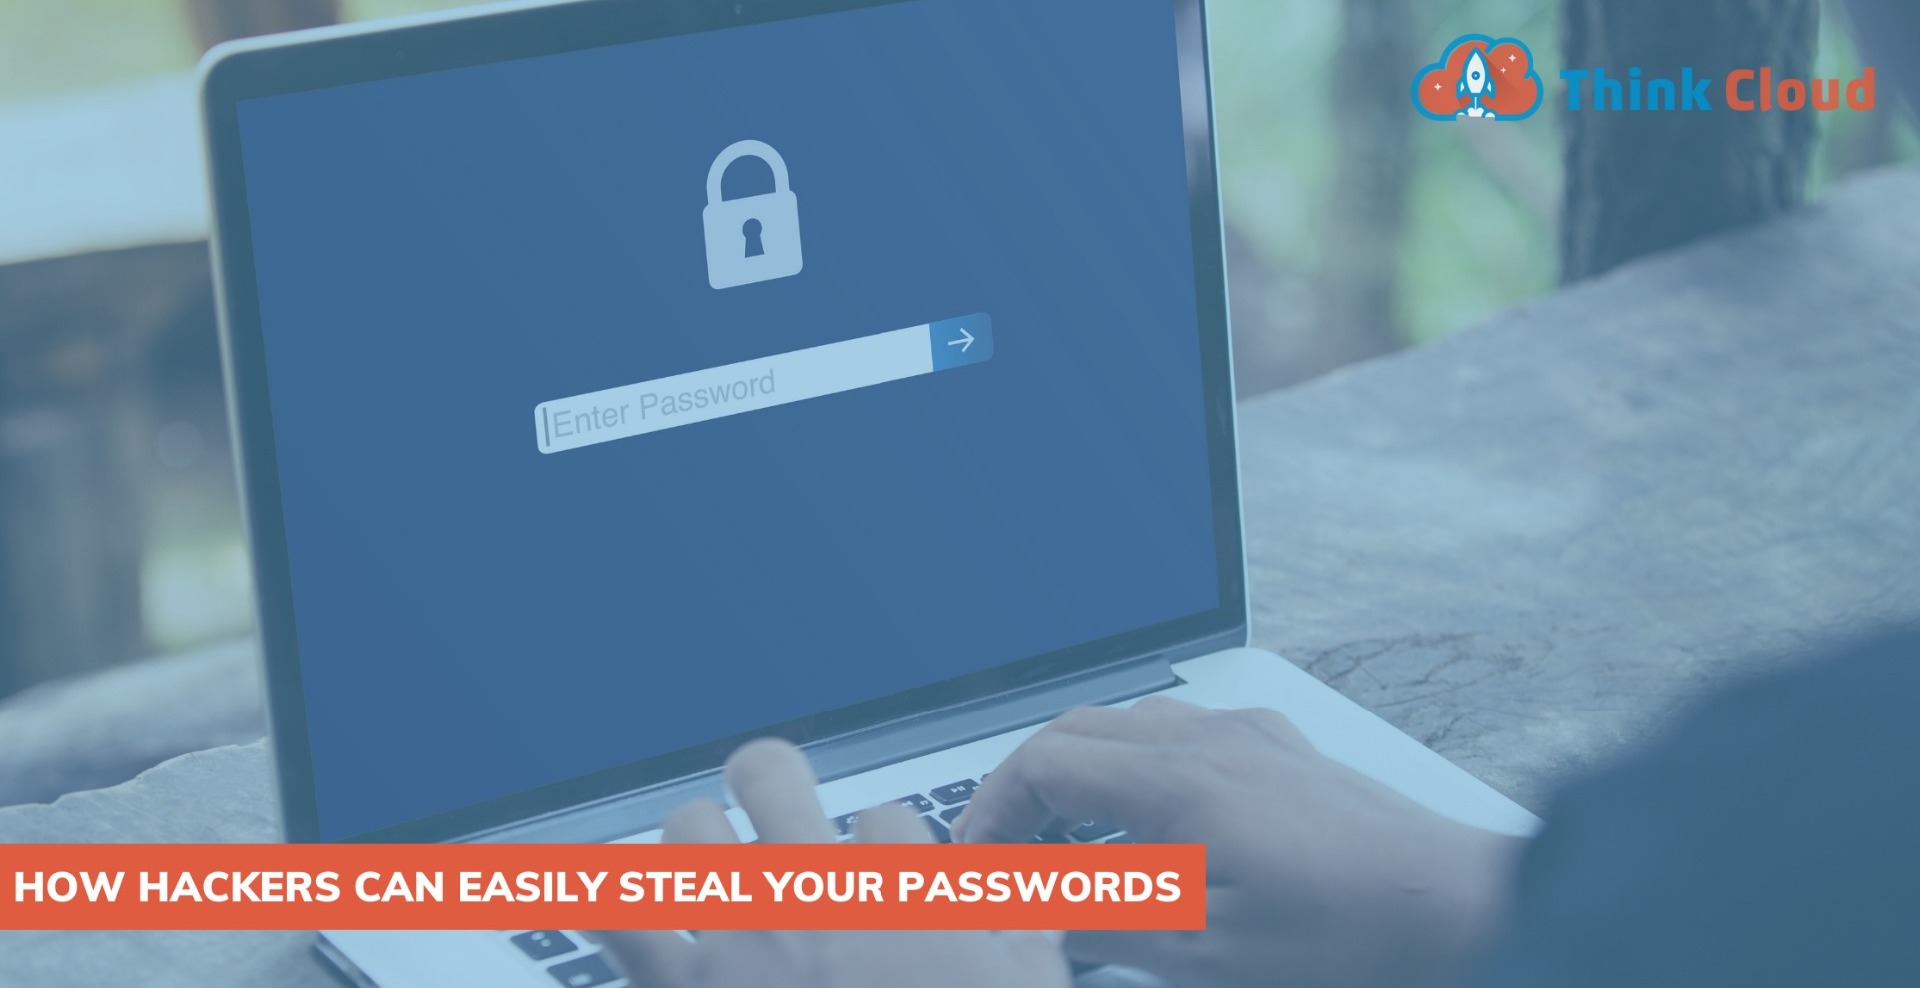 How hackers can easily steal your passwords